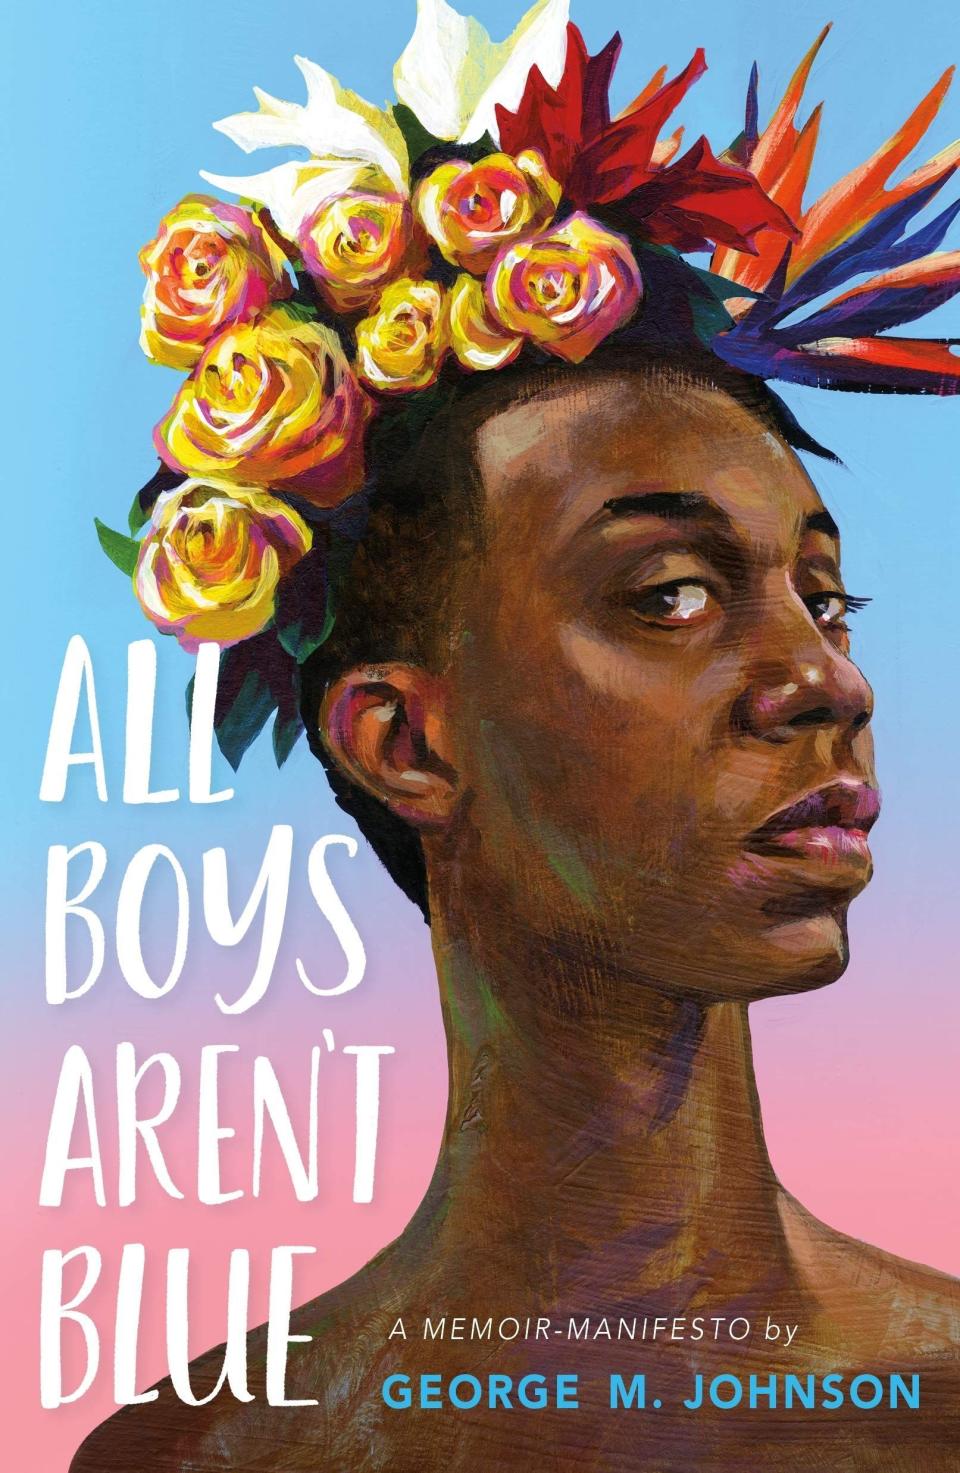 30) ‘All Boys Aren’t Blue’ by George M. Johnson